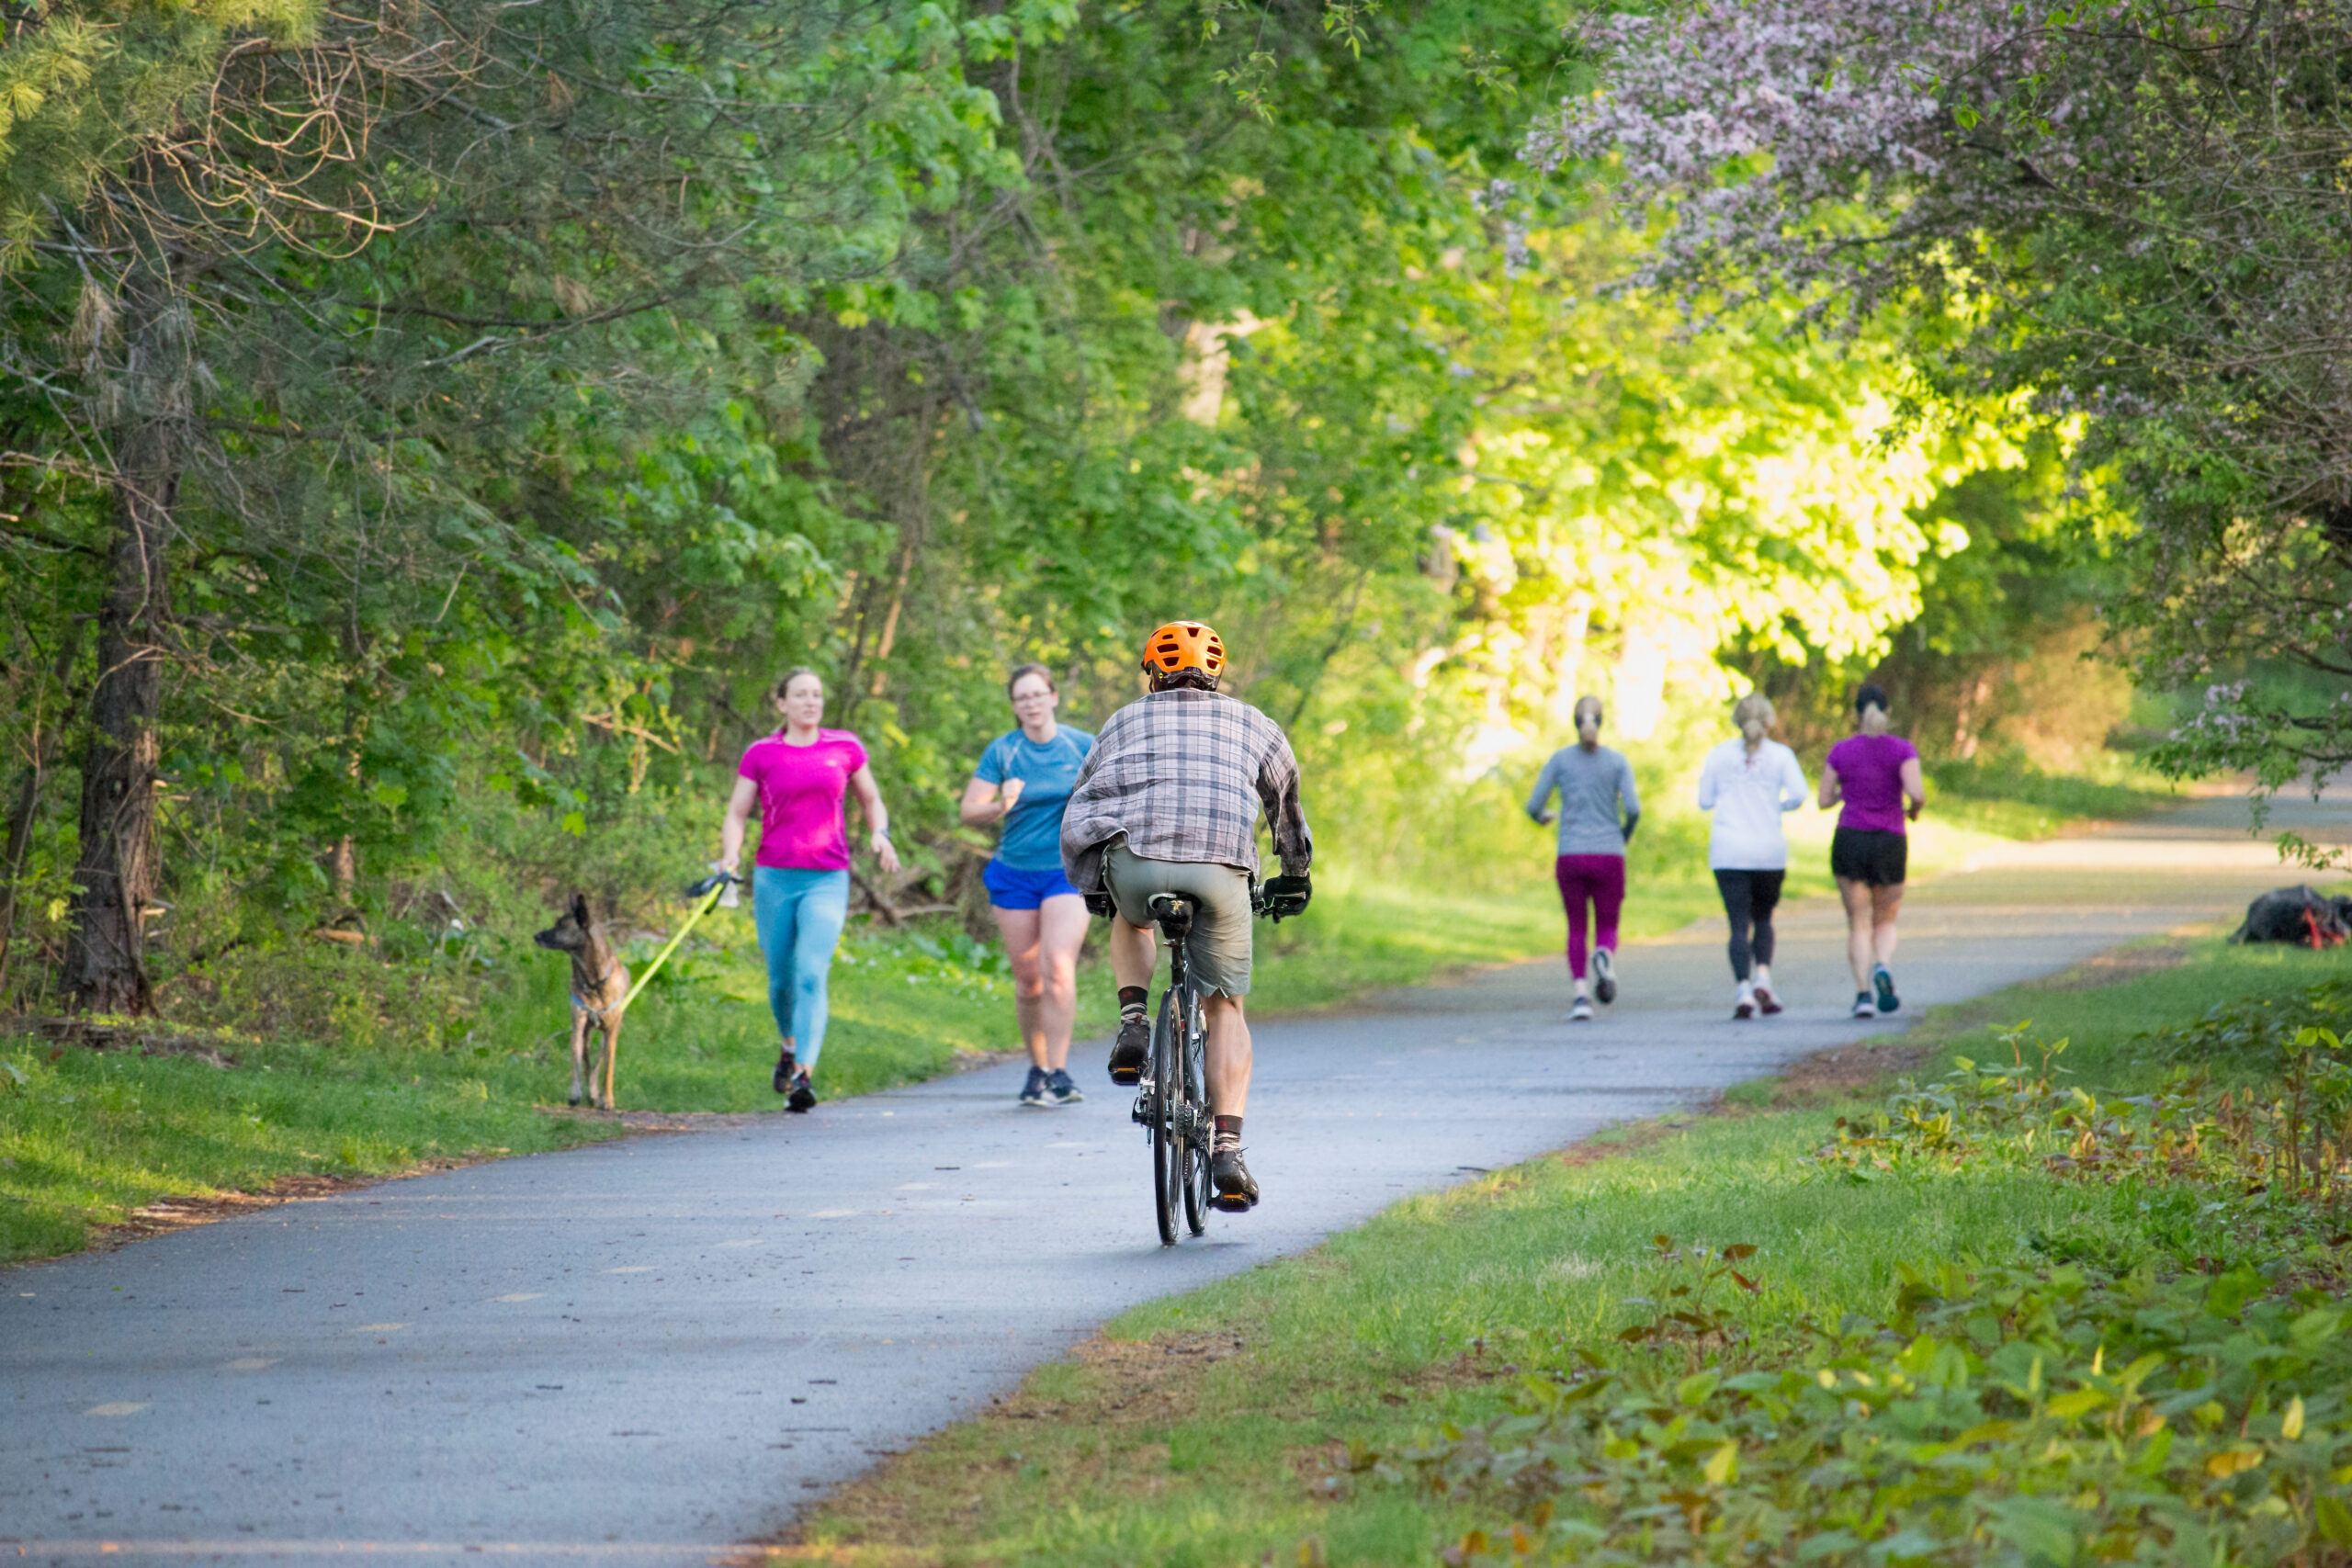 A person on a bike wearing a helmet shirt and shorts, cycles away from the camera along a paved path, while a dog walker with a dog on lead, and a runner are moving towards the camera. Three more runners are running away from the camera. The path is lined by green trees and grass.